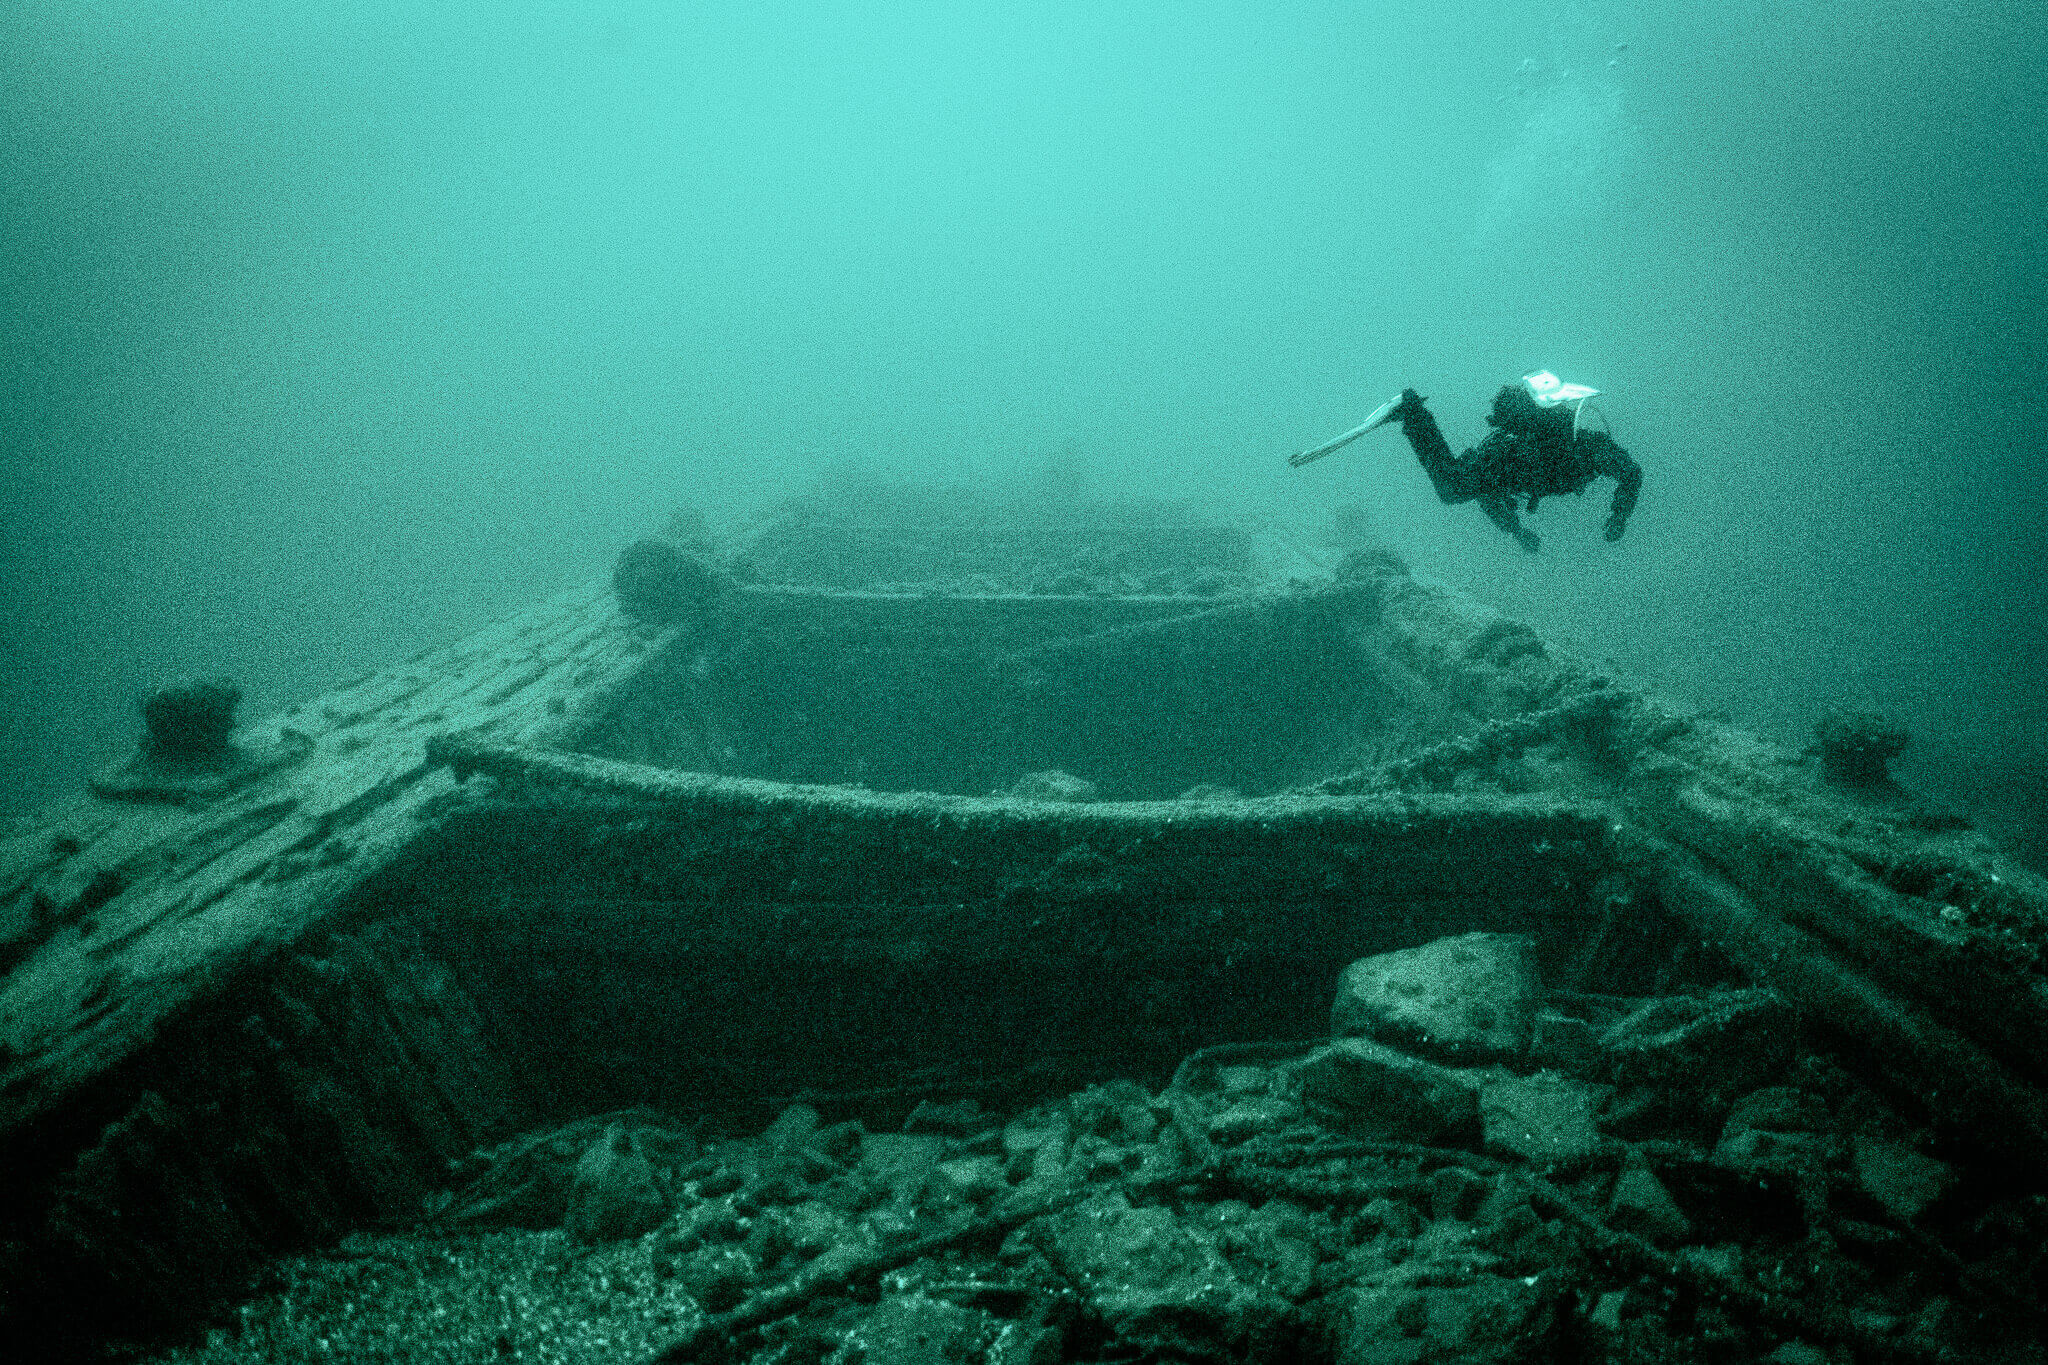 Underwater photo of a scuba diver exploring the Ash Island Barge shipwreck in the Thousand Islands area of the St. Lawrence River